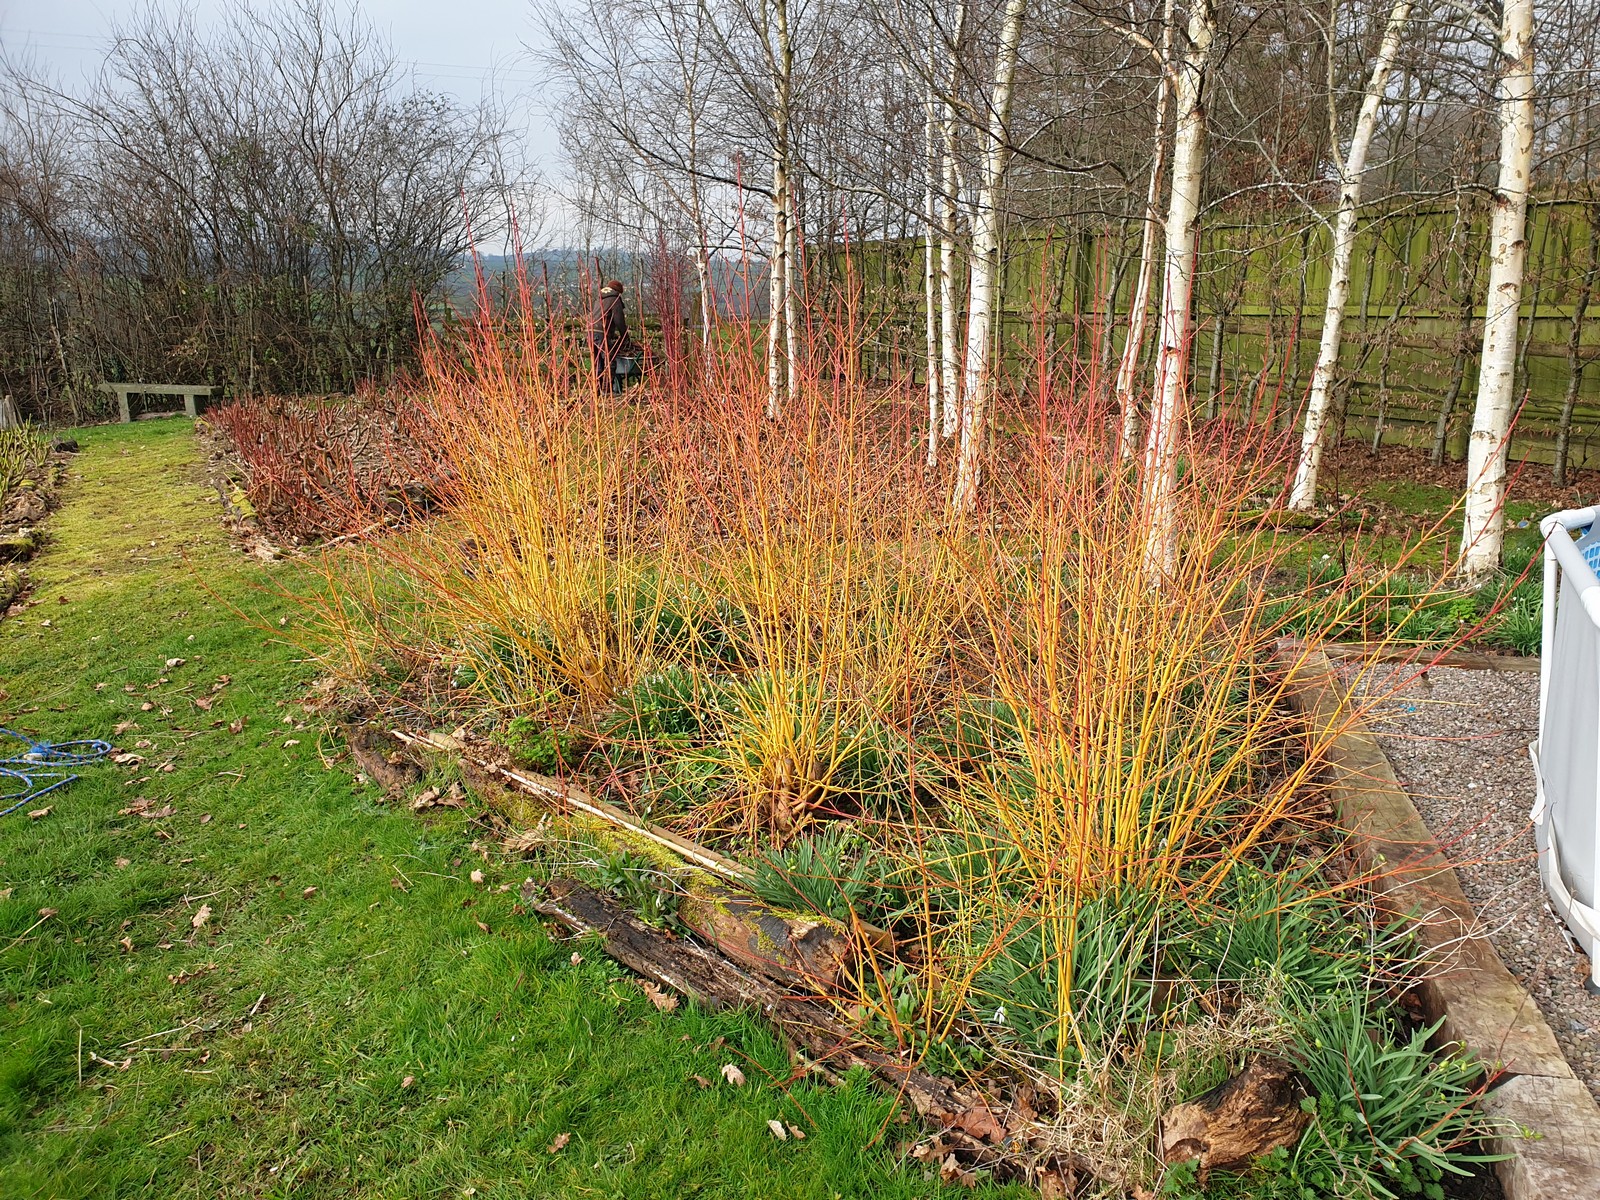 Coppiced winter Dogwoods and Silver Birch